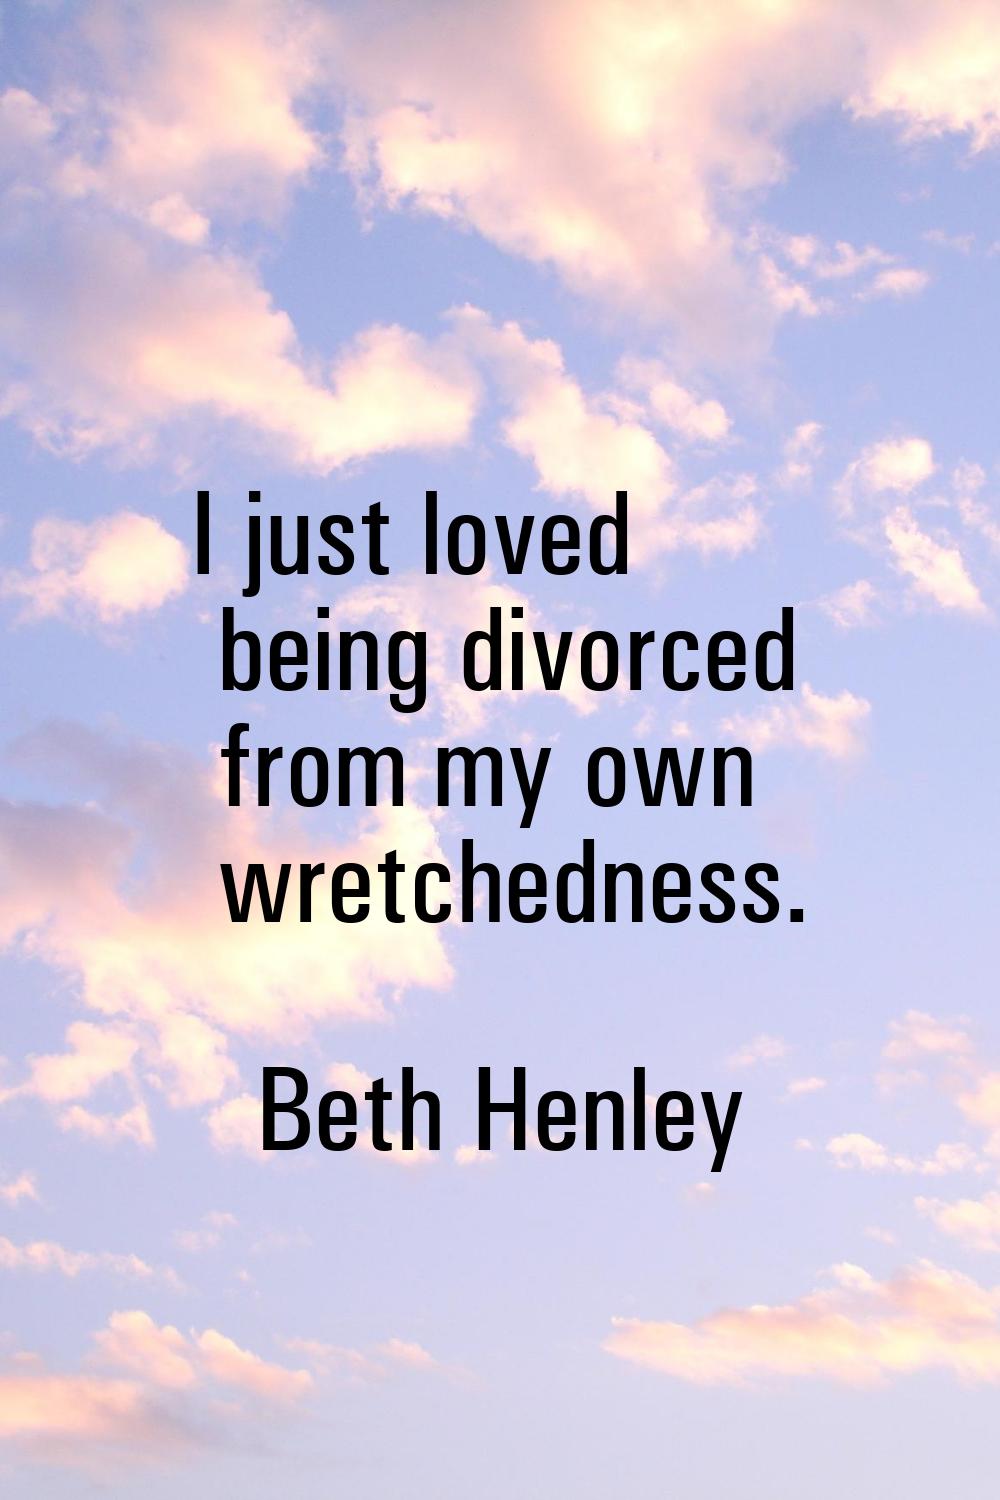 I just loved being divorced from my own wretchedness.